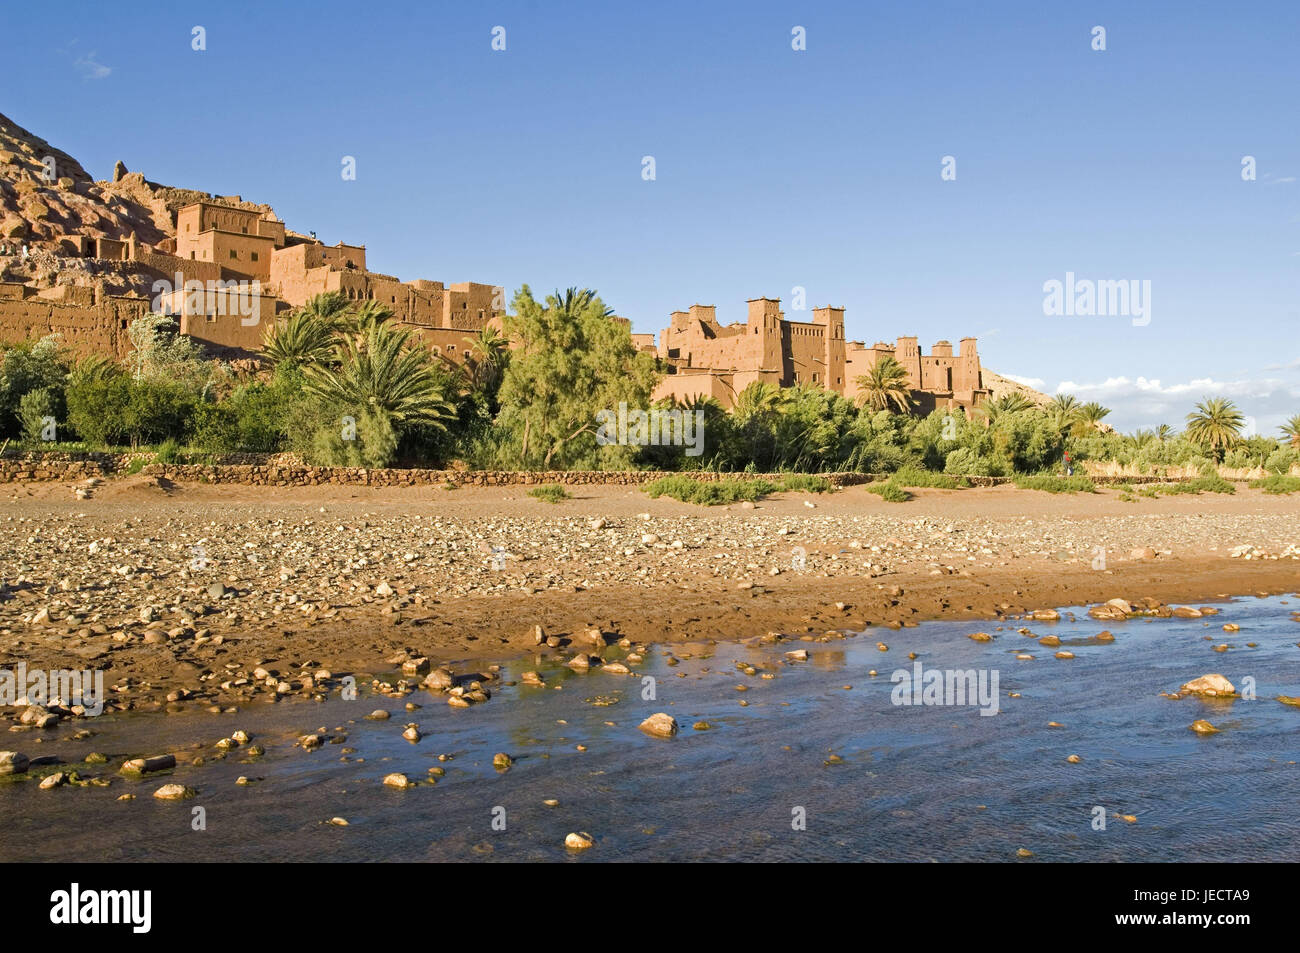 Morocco, Aït-Ben-Haddou, local view, riverside, Africa, North Africa, place, Ksar, houses, mucky construction method, typically, typically for country, mucky houses, architecture, mucky architecture, river, shore, stones, palms, vegetation, outside, deserted, place of interest, UNESCO-world cultural heritage, destination, Stock Photo